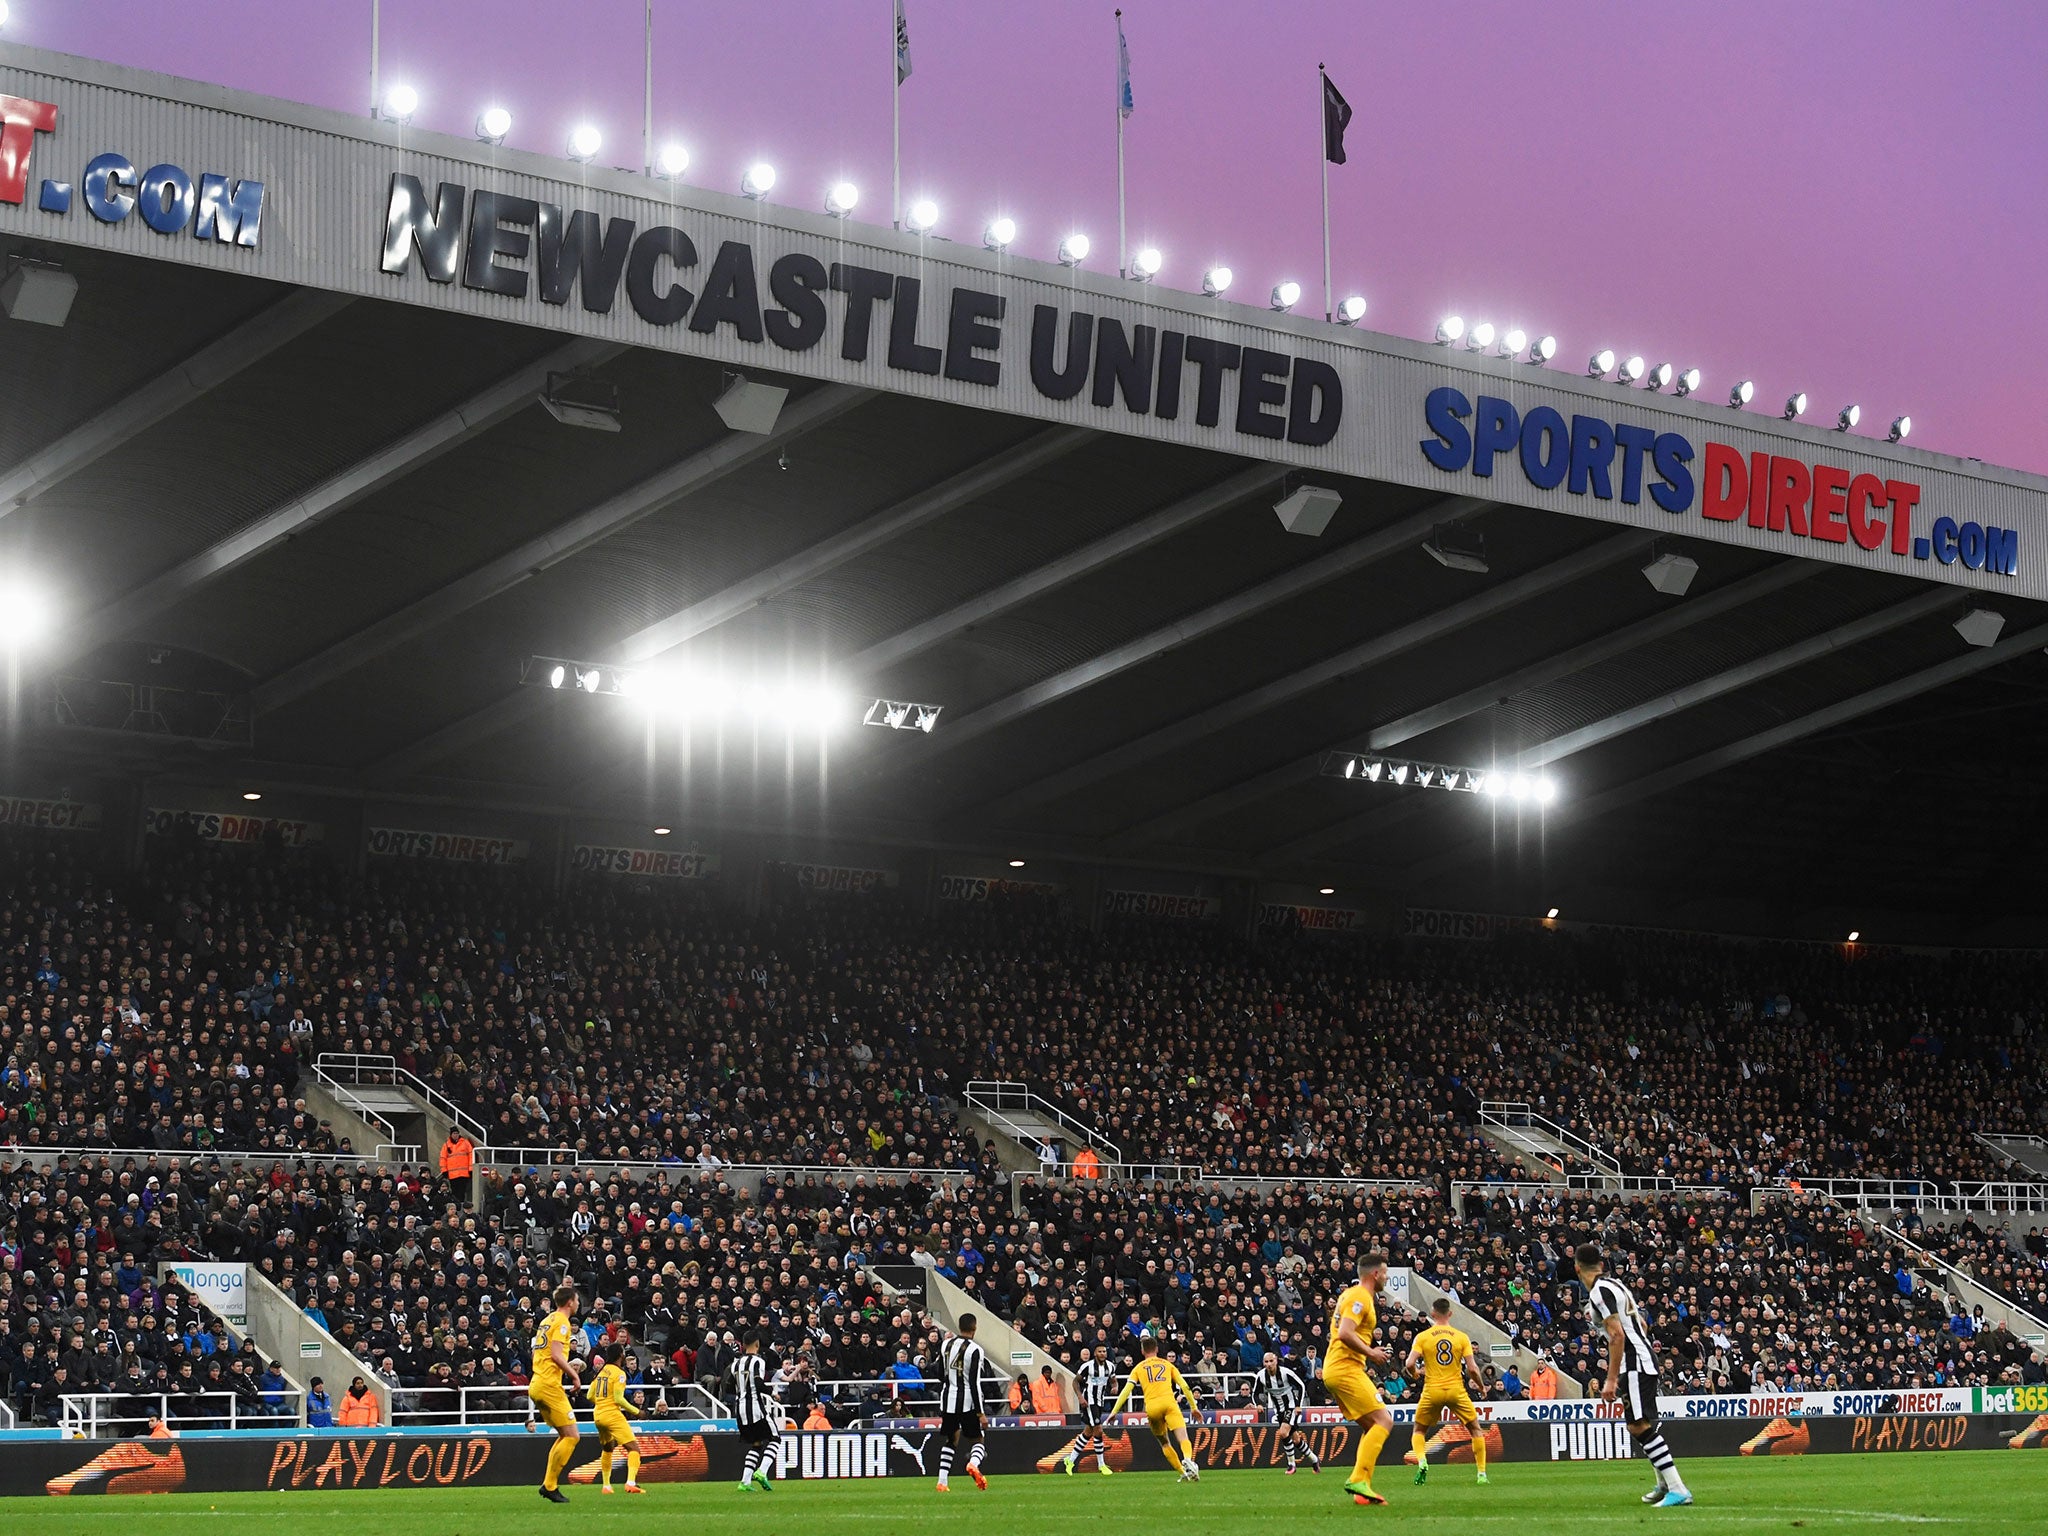 Newcastle United will now have new owners